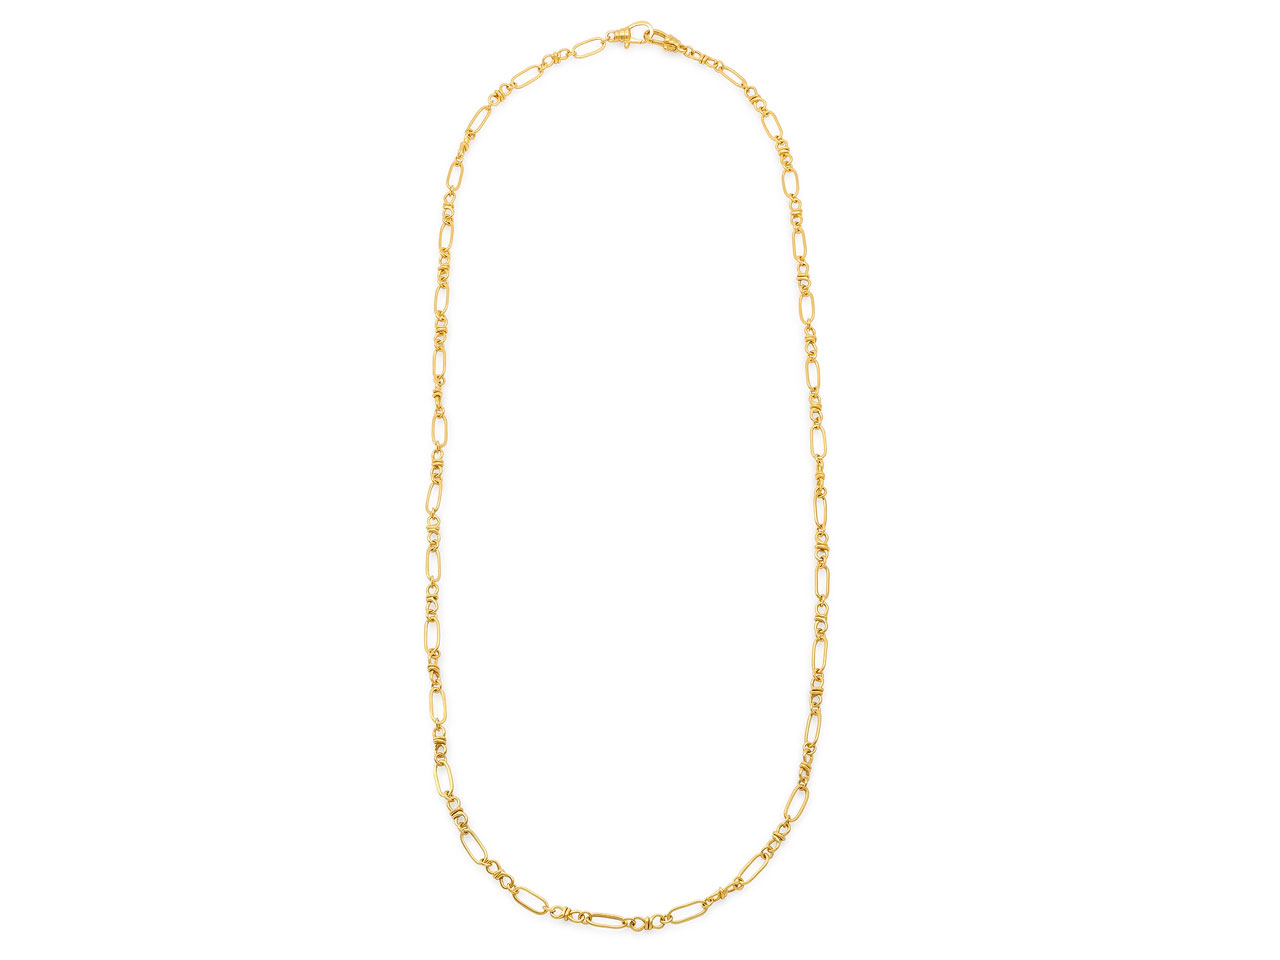 Denise Roberge Chain in 18K Gold